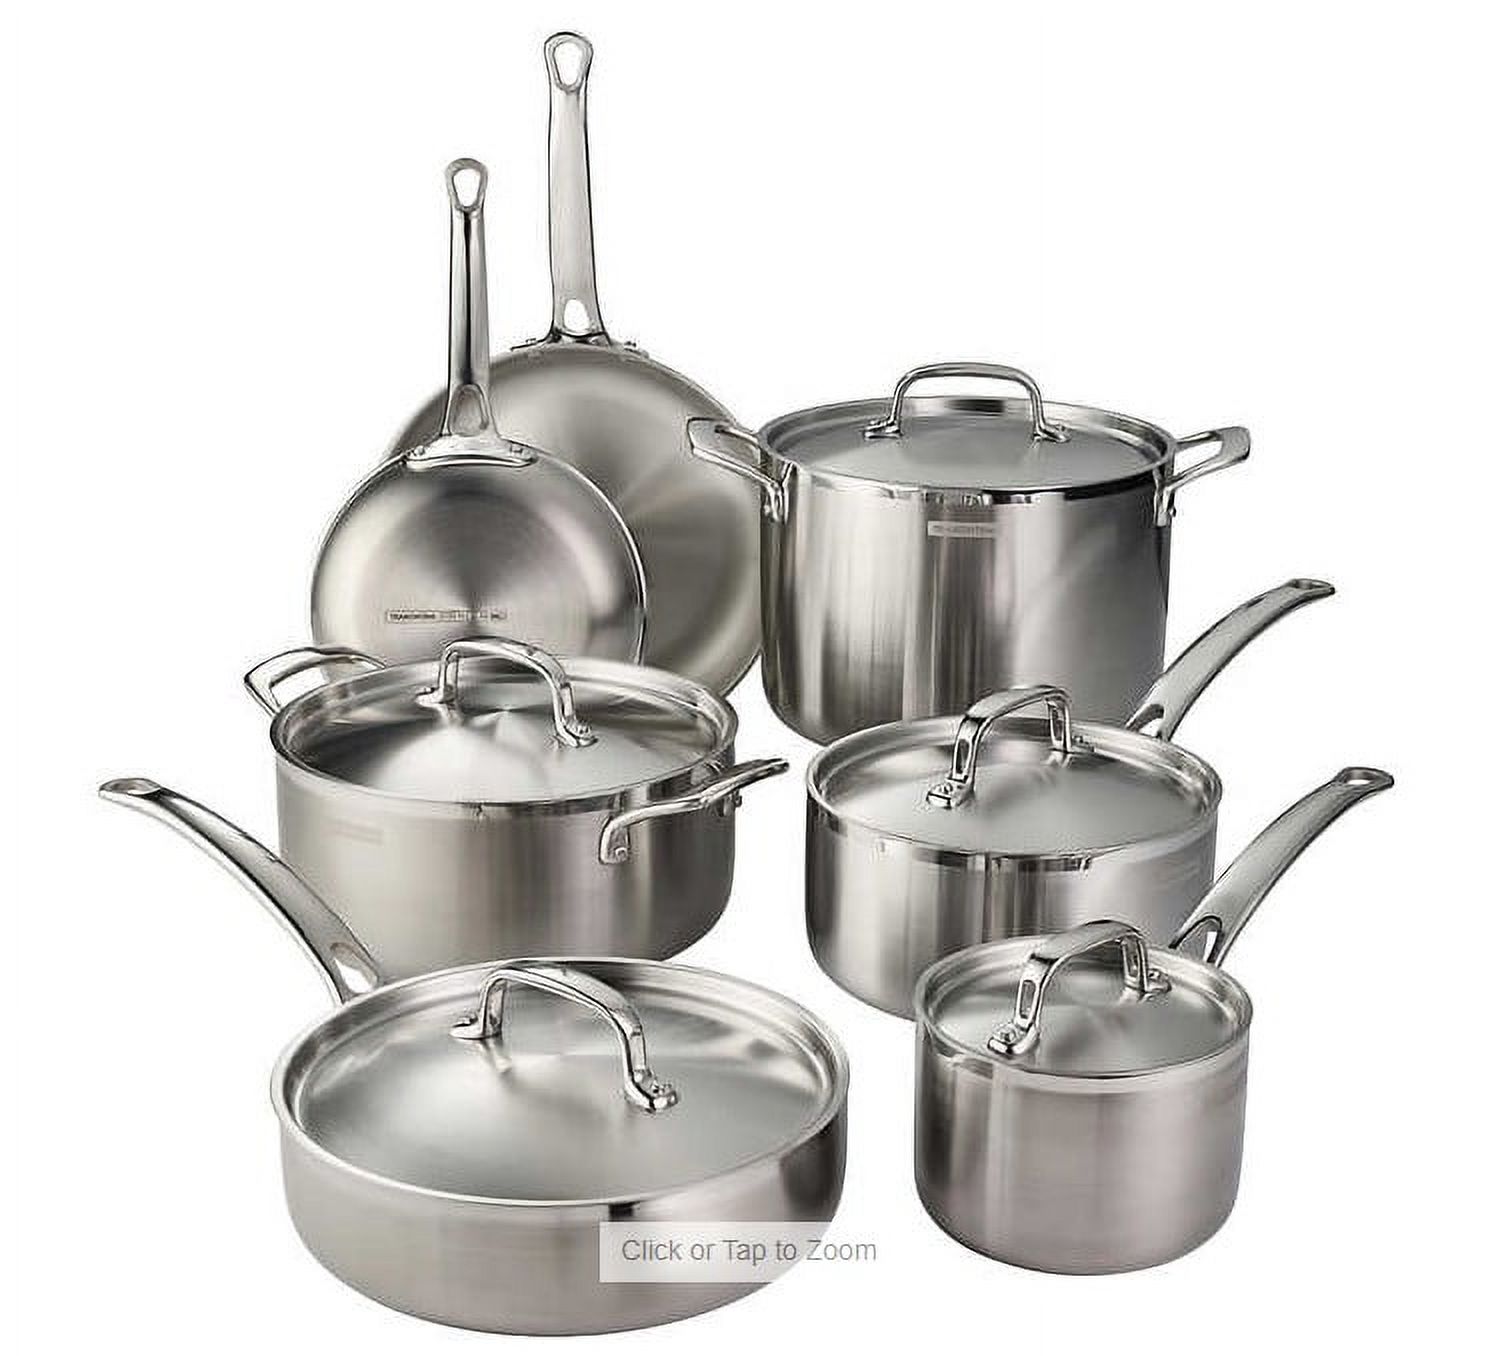 Tramontina 80116/249DS Gourmet Stainless Steel Induction-Ready Tri-Ply Clad 12-Piece Cookware Set, NSF-Certified, Made in Brazil - image 2 of 6